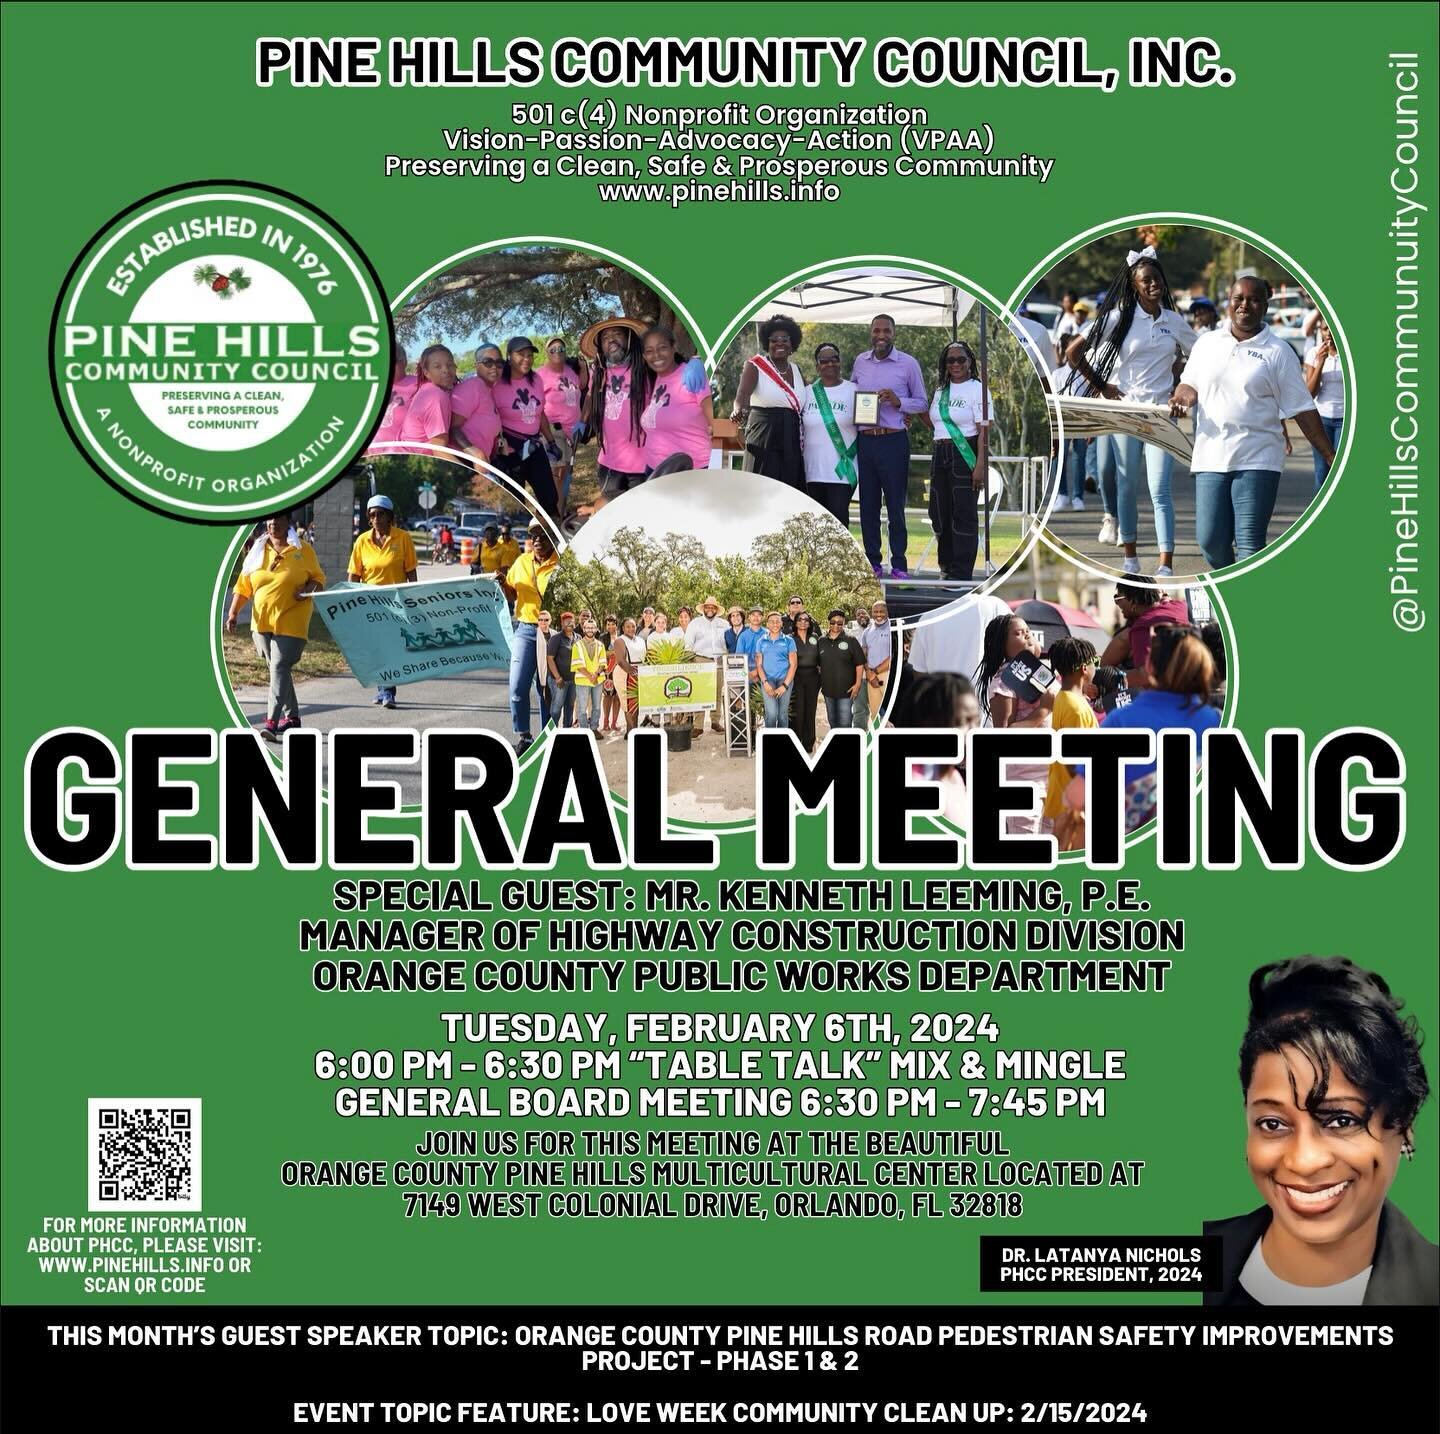 Join us for our general meeting February 6th, 2024 at the Orange County Pine Hills Multicultural Center.